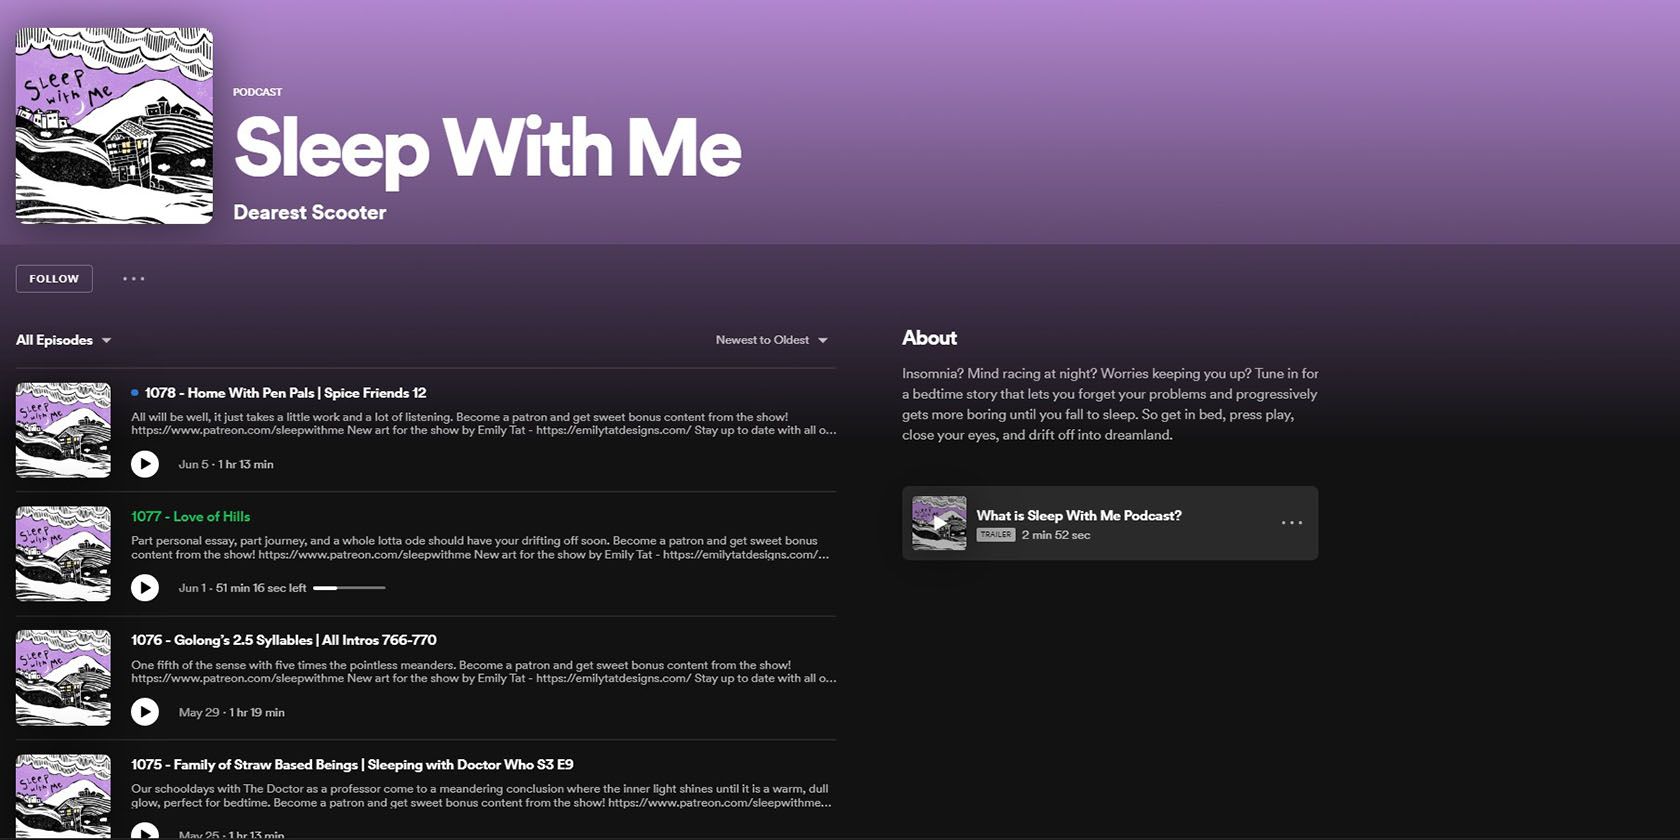 Sleep with Me Podcast on Spotify